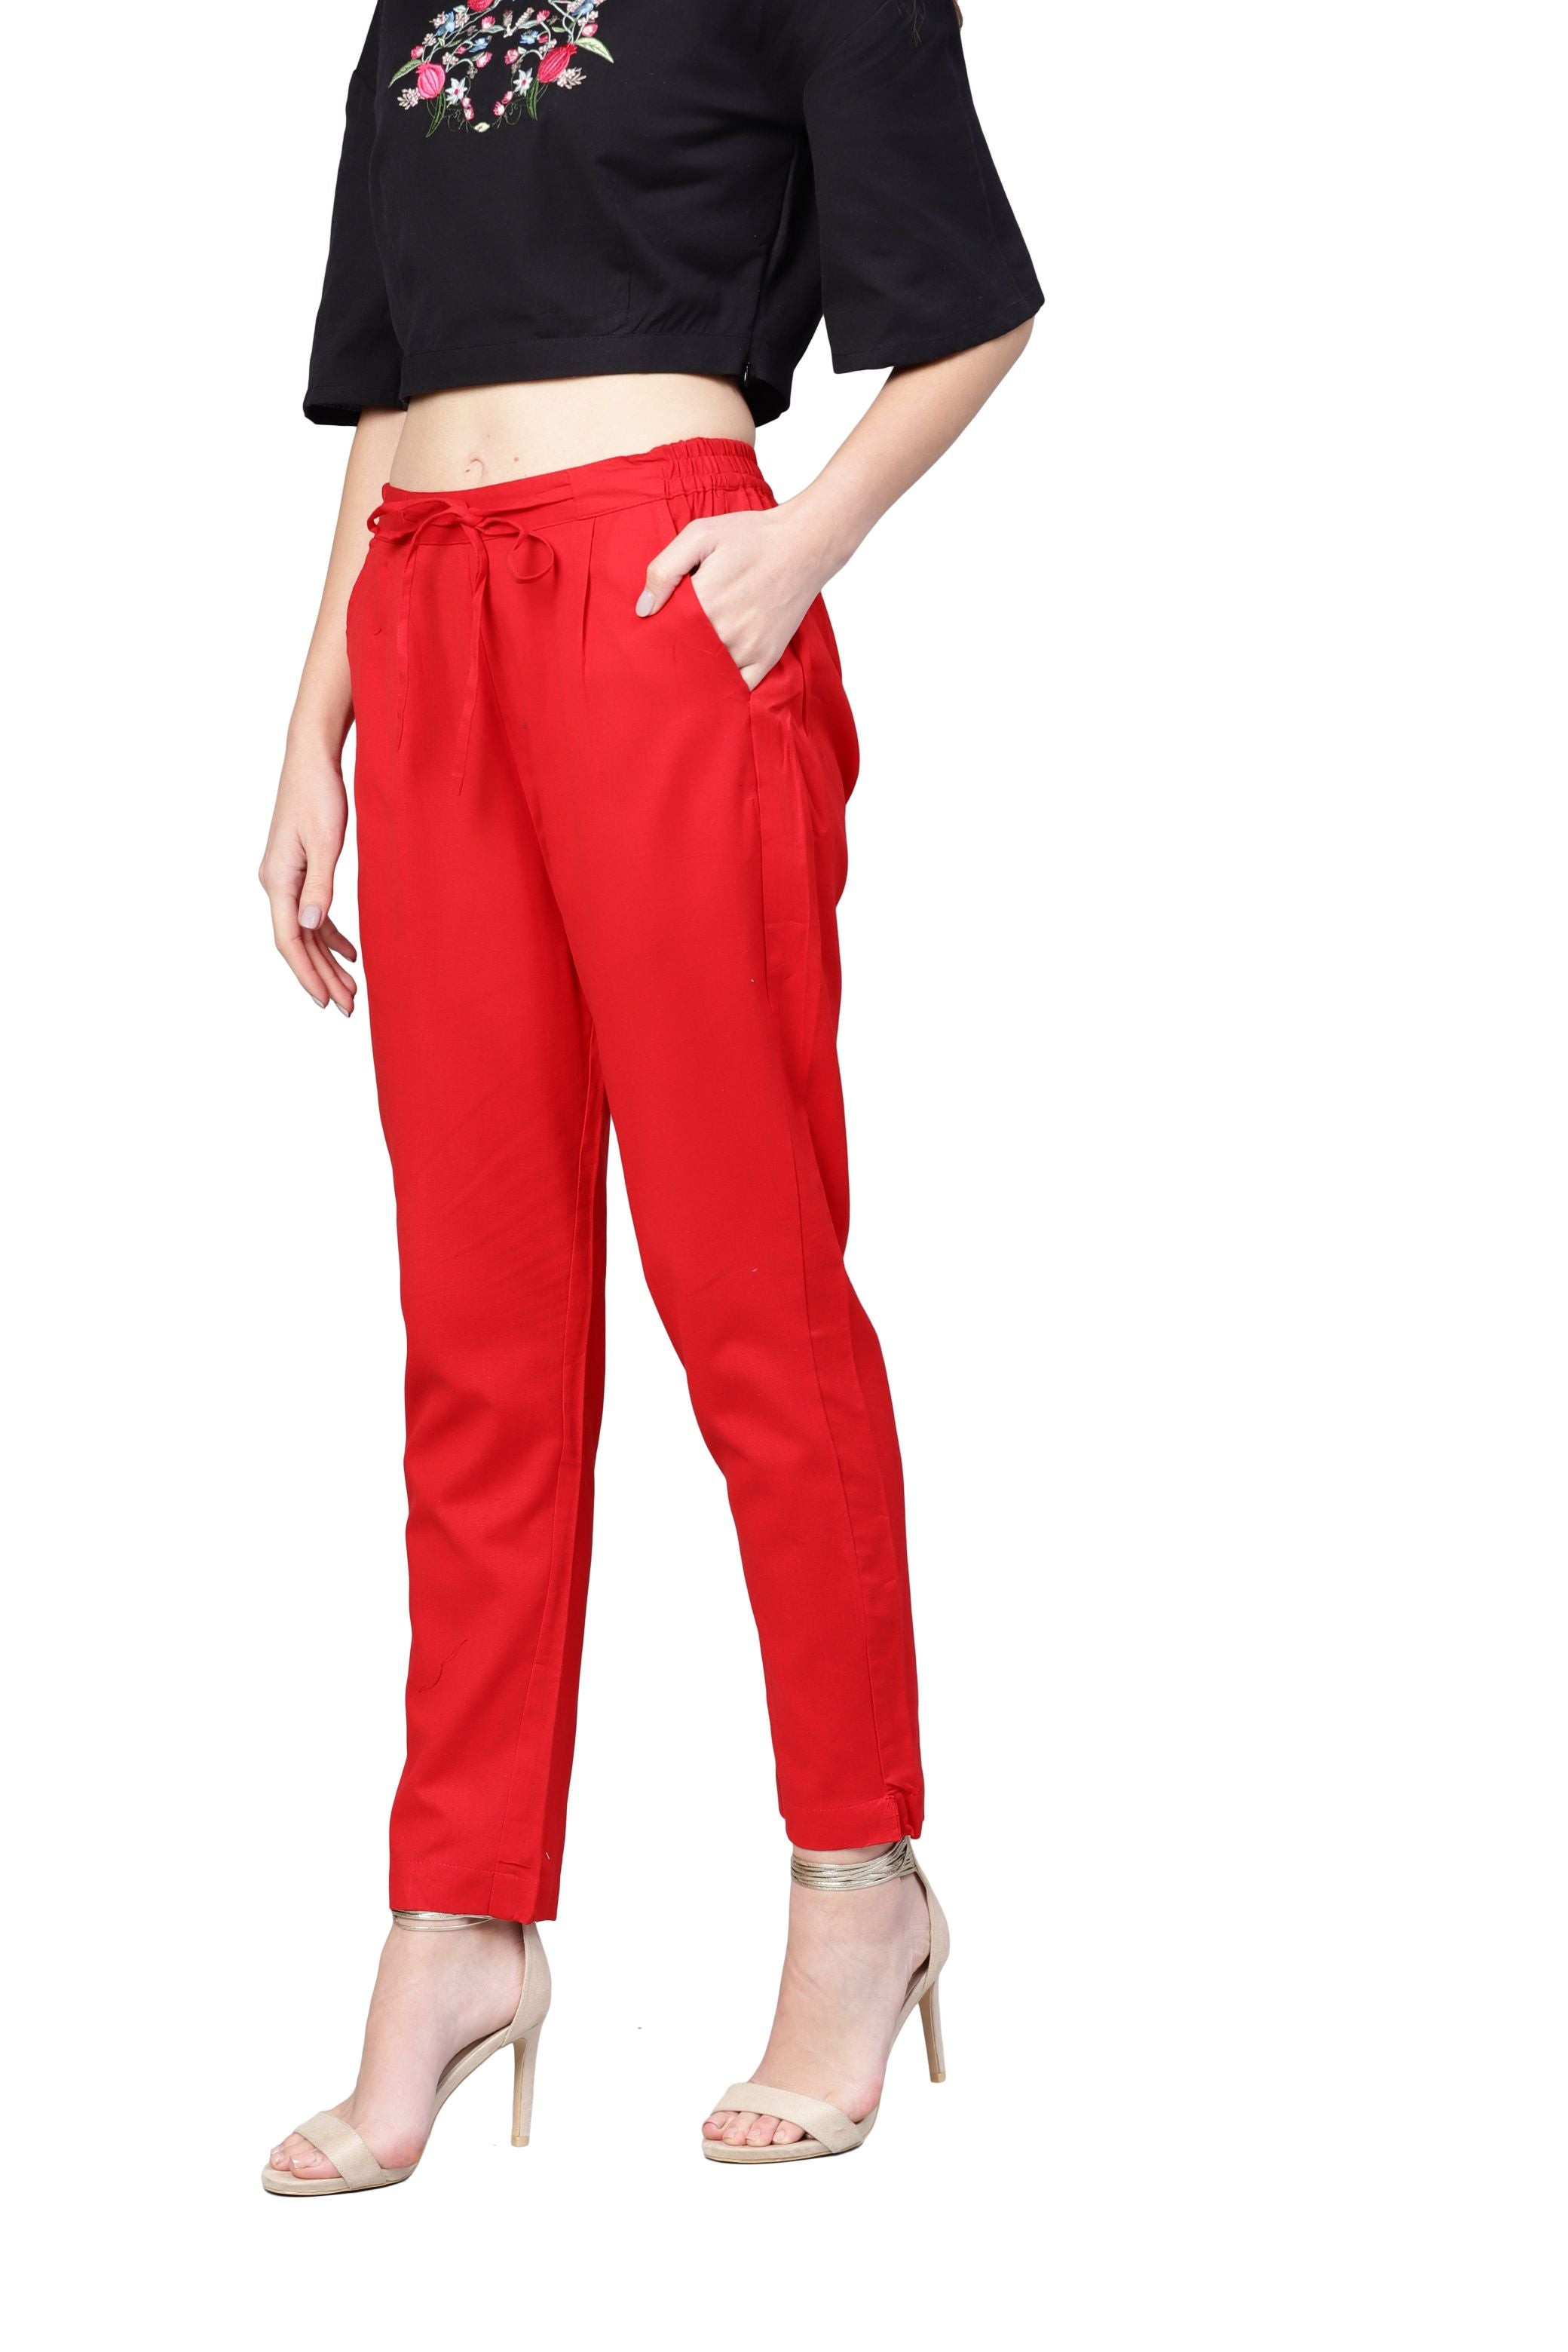 Women Red Cotton Solid Trouser by Myshka (1 Pc Set)